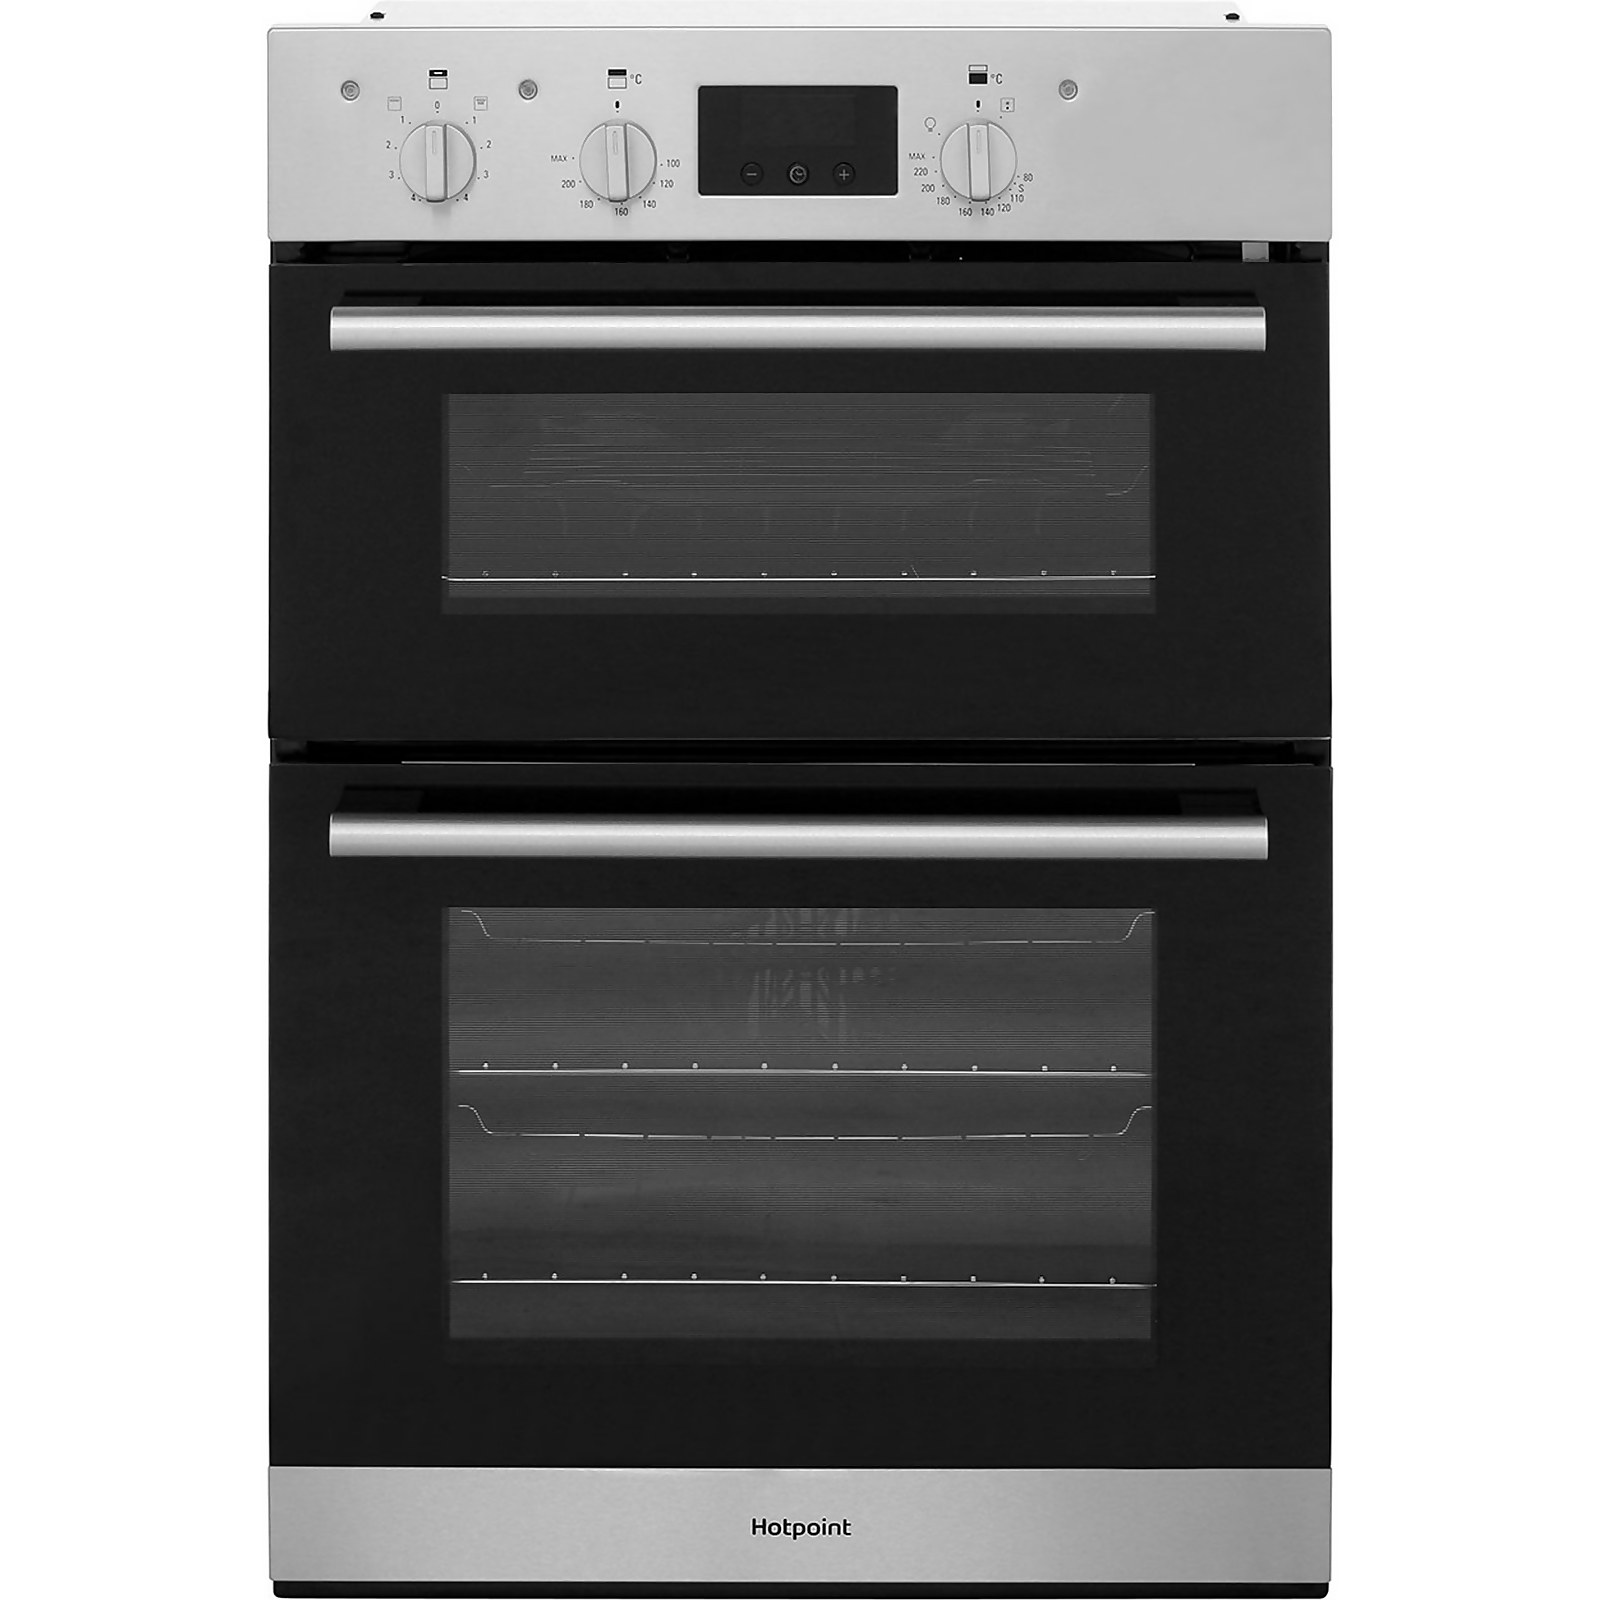 Photo of Hotpoint Class 2 Dd2544cix Built In Electric Double Oven - Stainless Steel